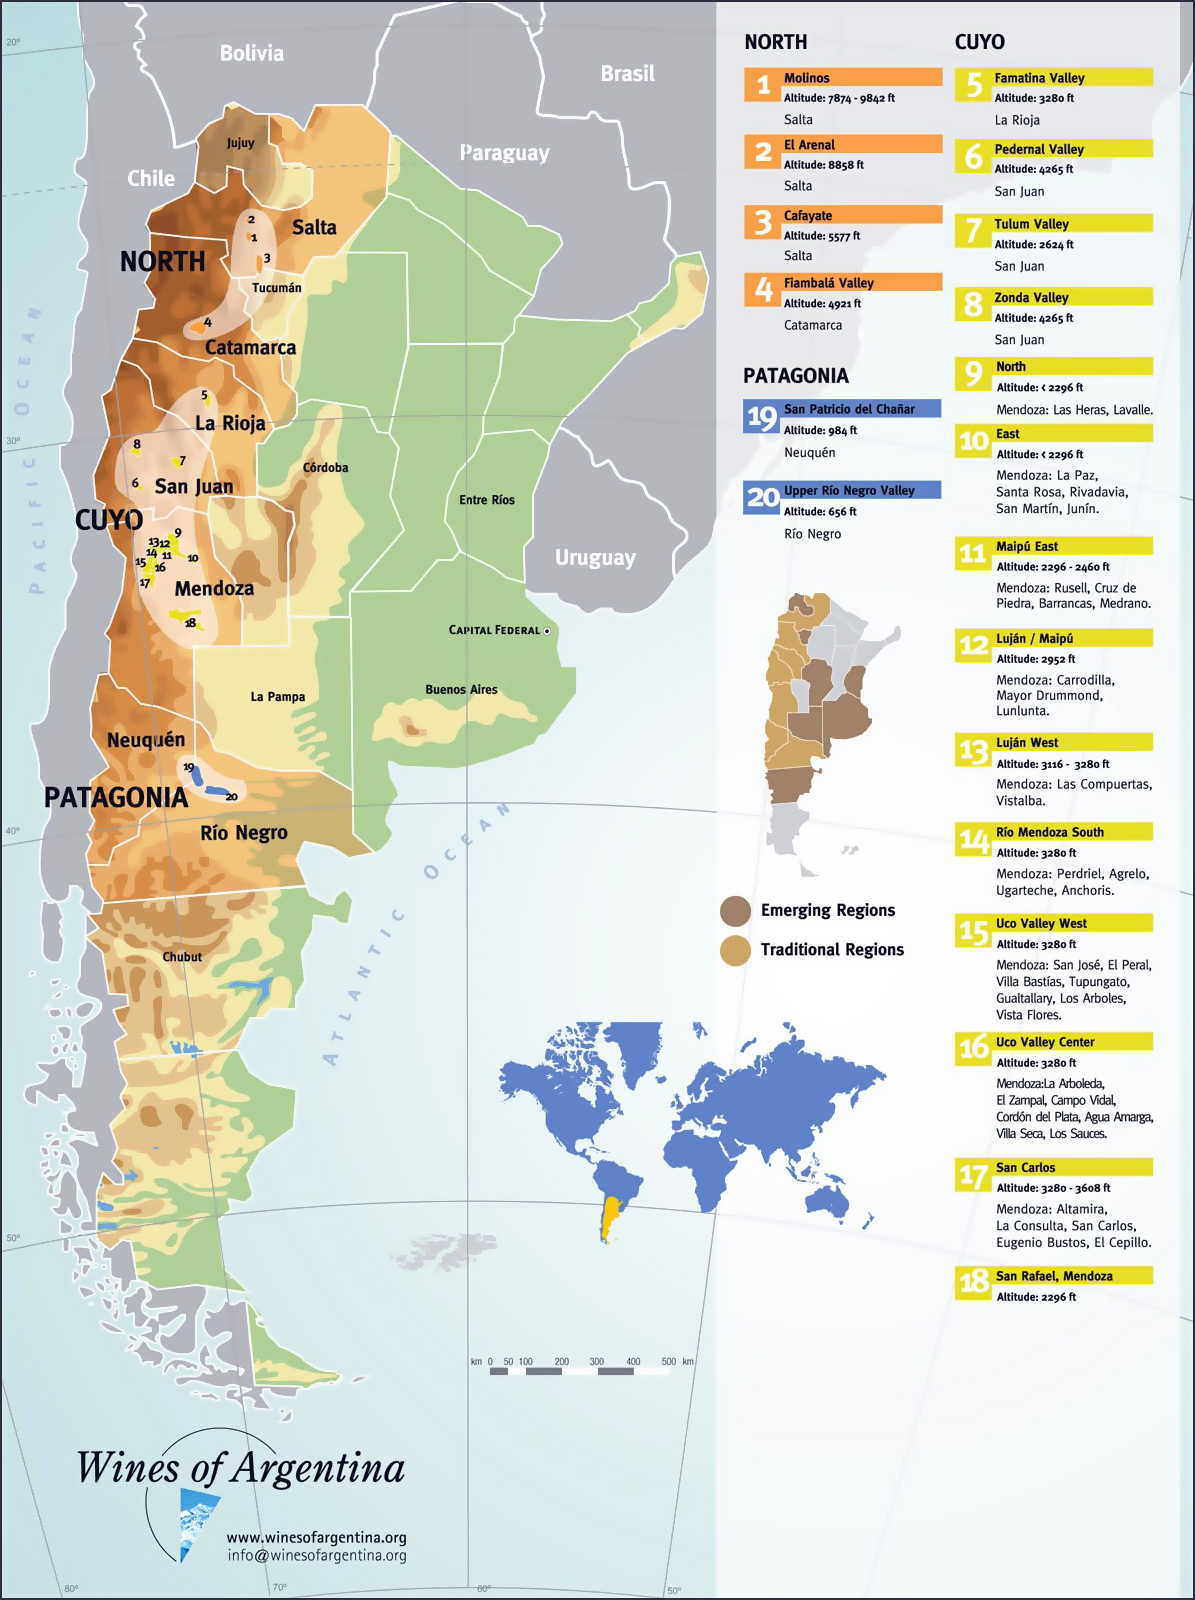 Detailed regions map of Argentina, Argentina, South America, Mapsland